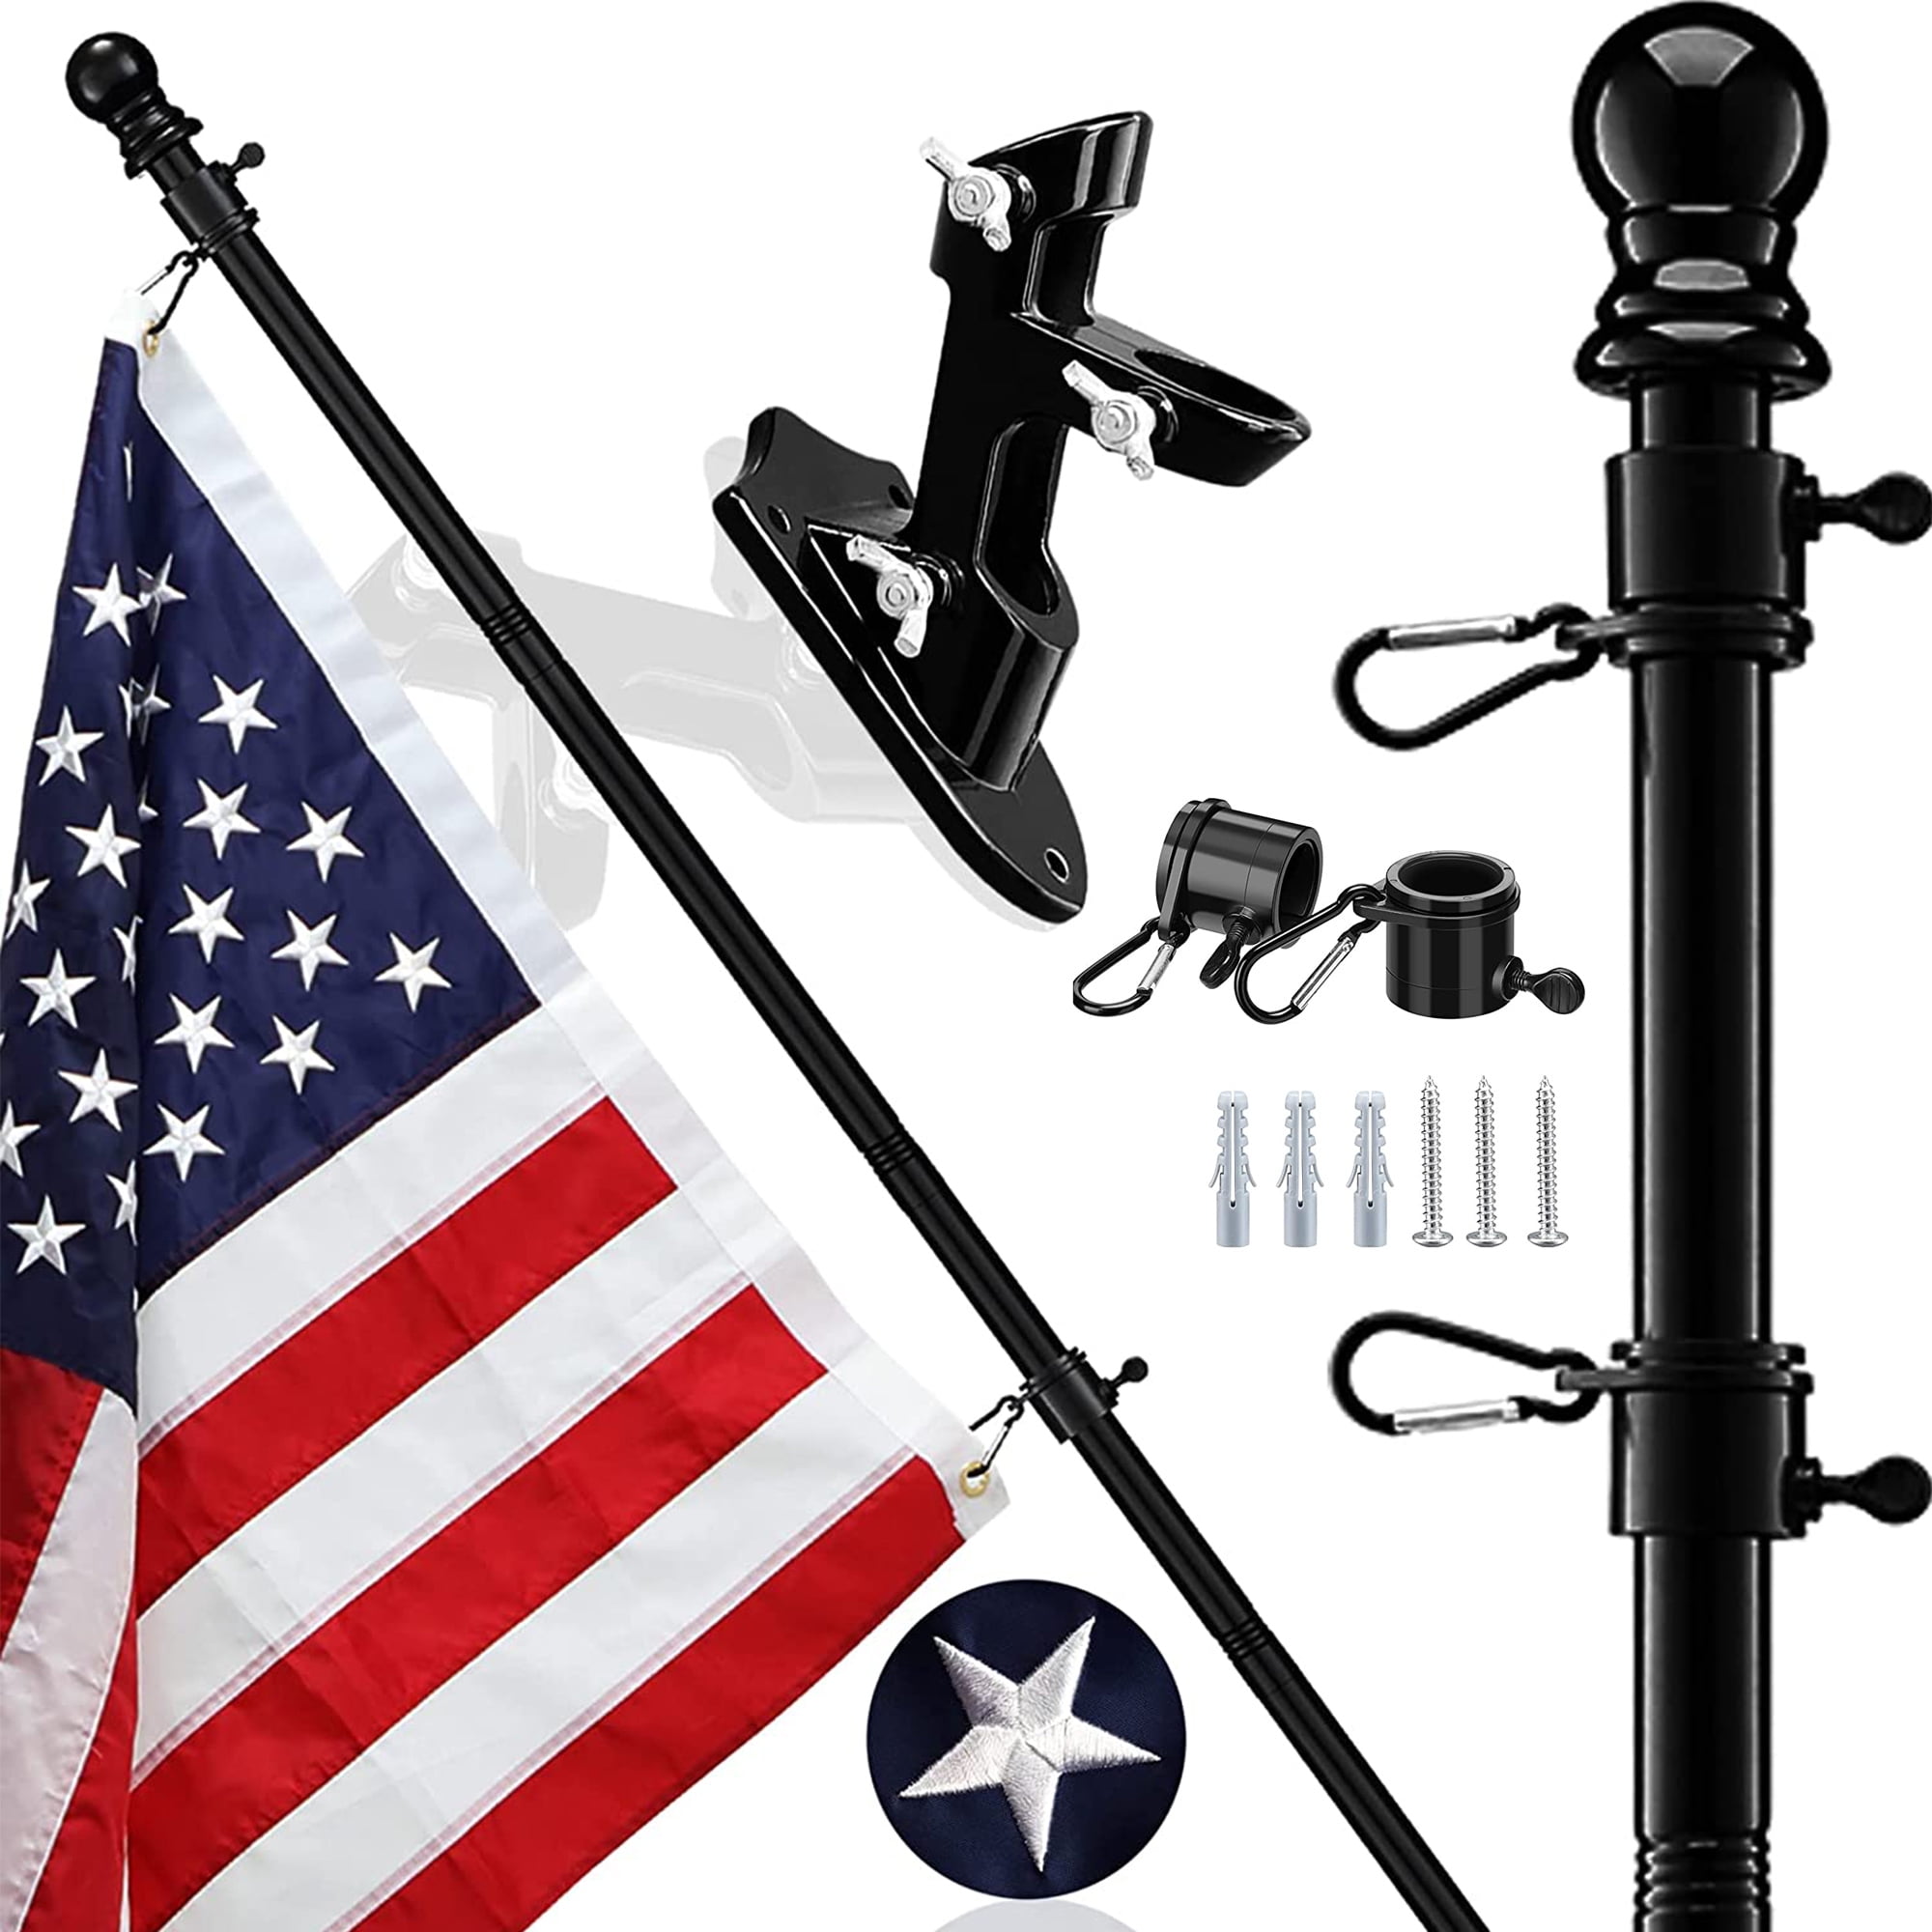 Adjustable Residential Flag Poles with Flag Pole Bracket for House Yard Suitable for 3x5 and 4x6 Flags Silver Flag Pole Kit 6FT Flagpole Kit for American Flag 